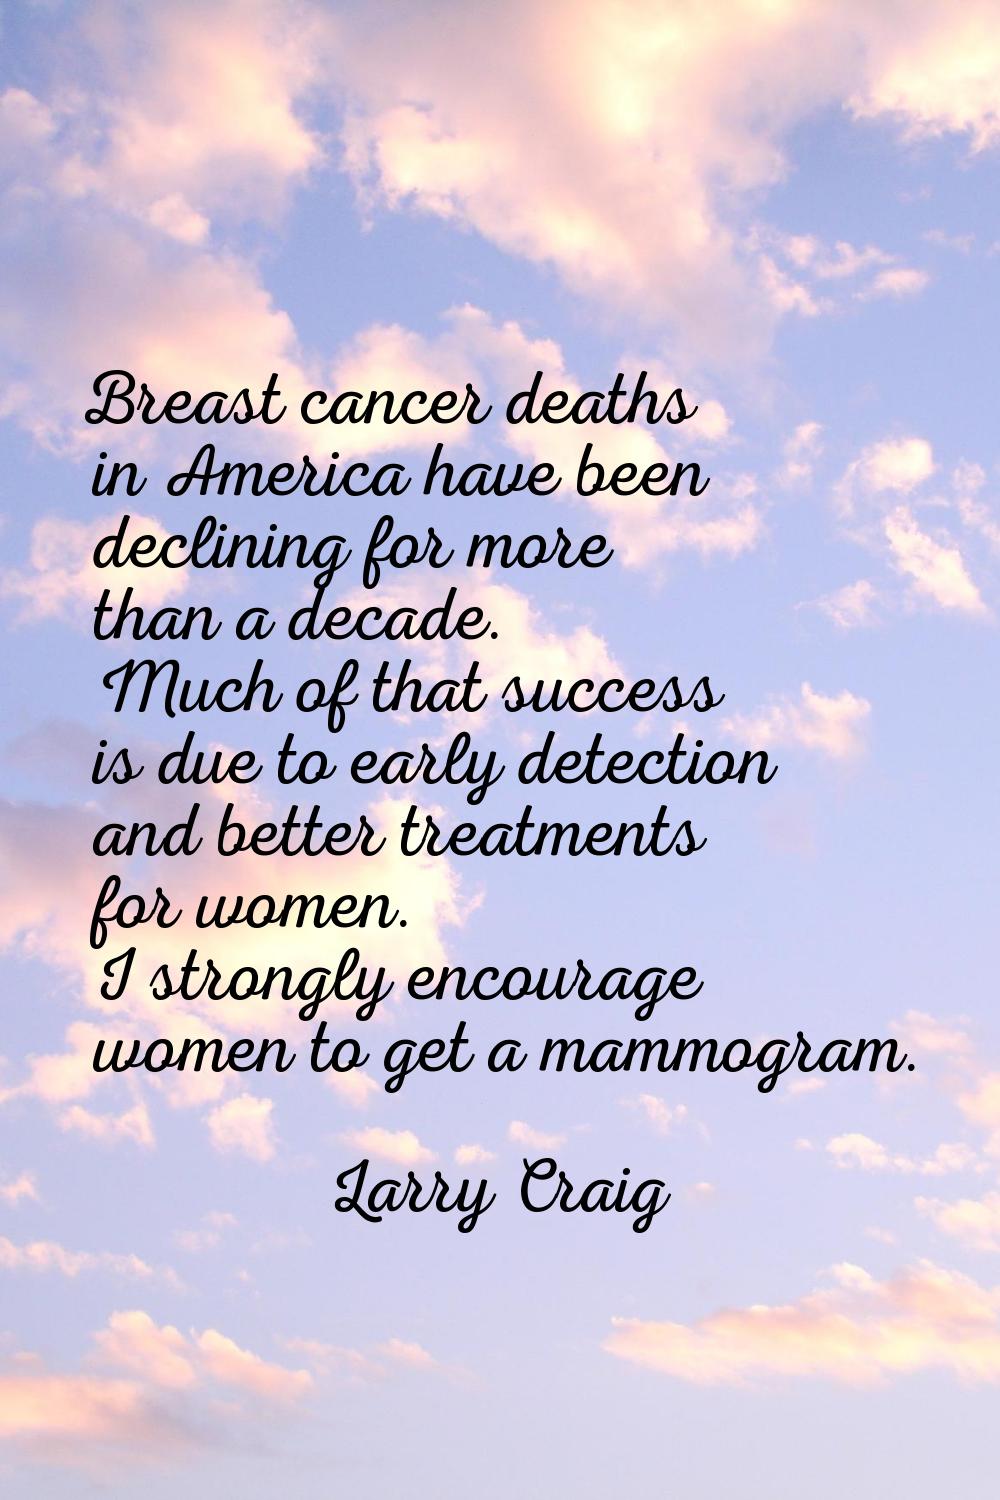 Breast cancer deaths in America have been declining for more than a decade. Much of that success is